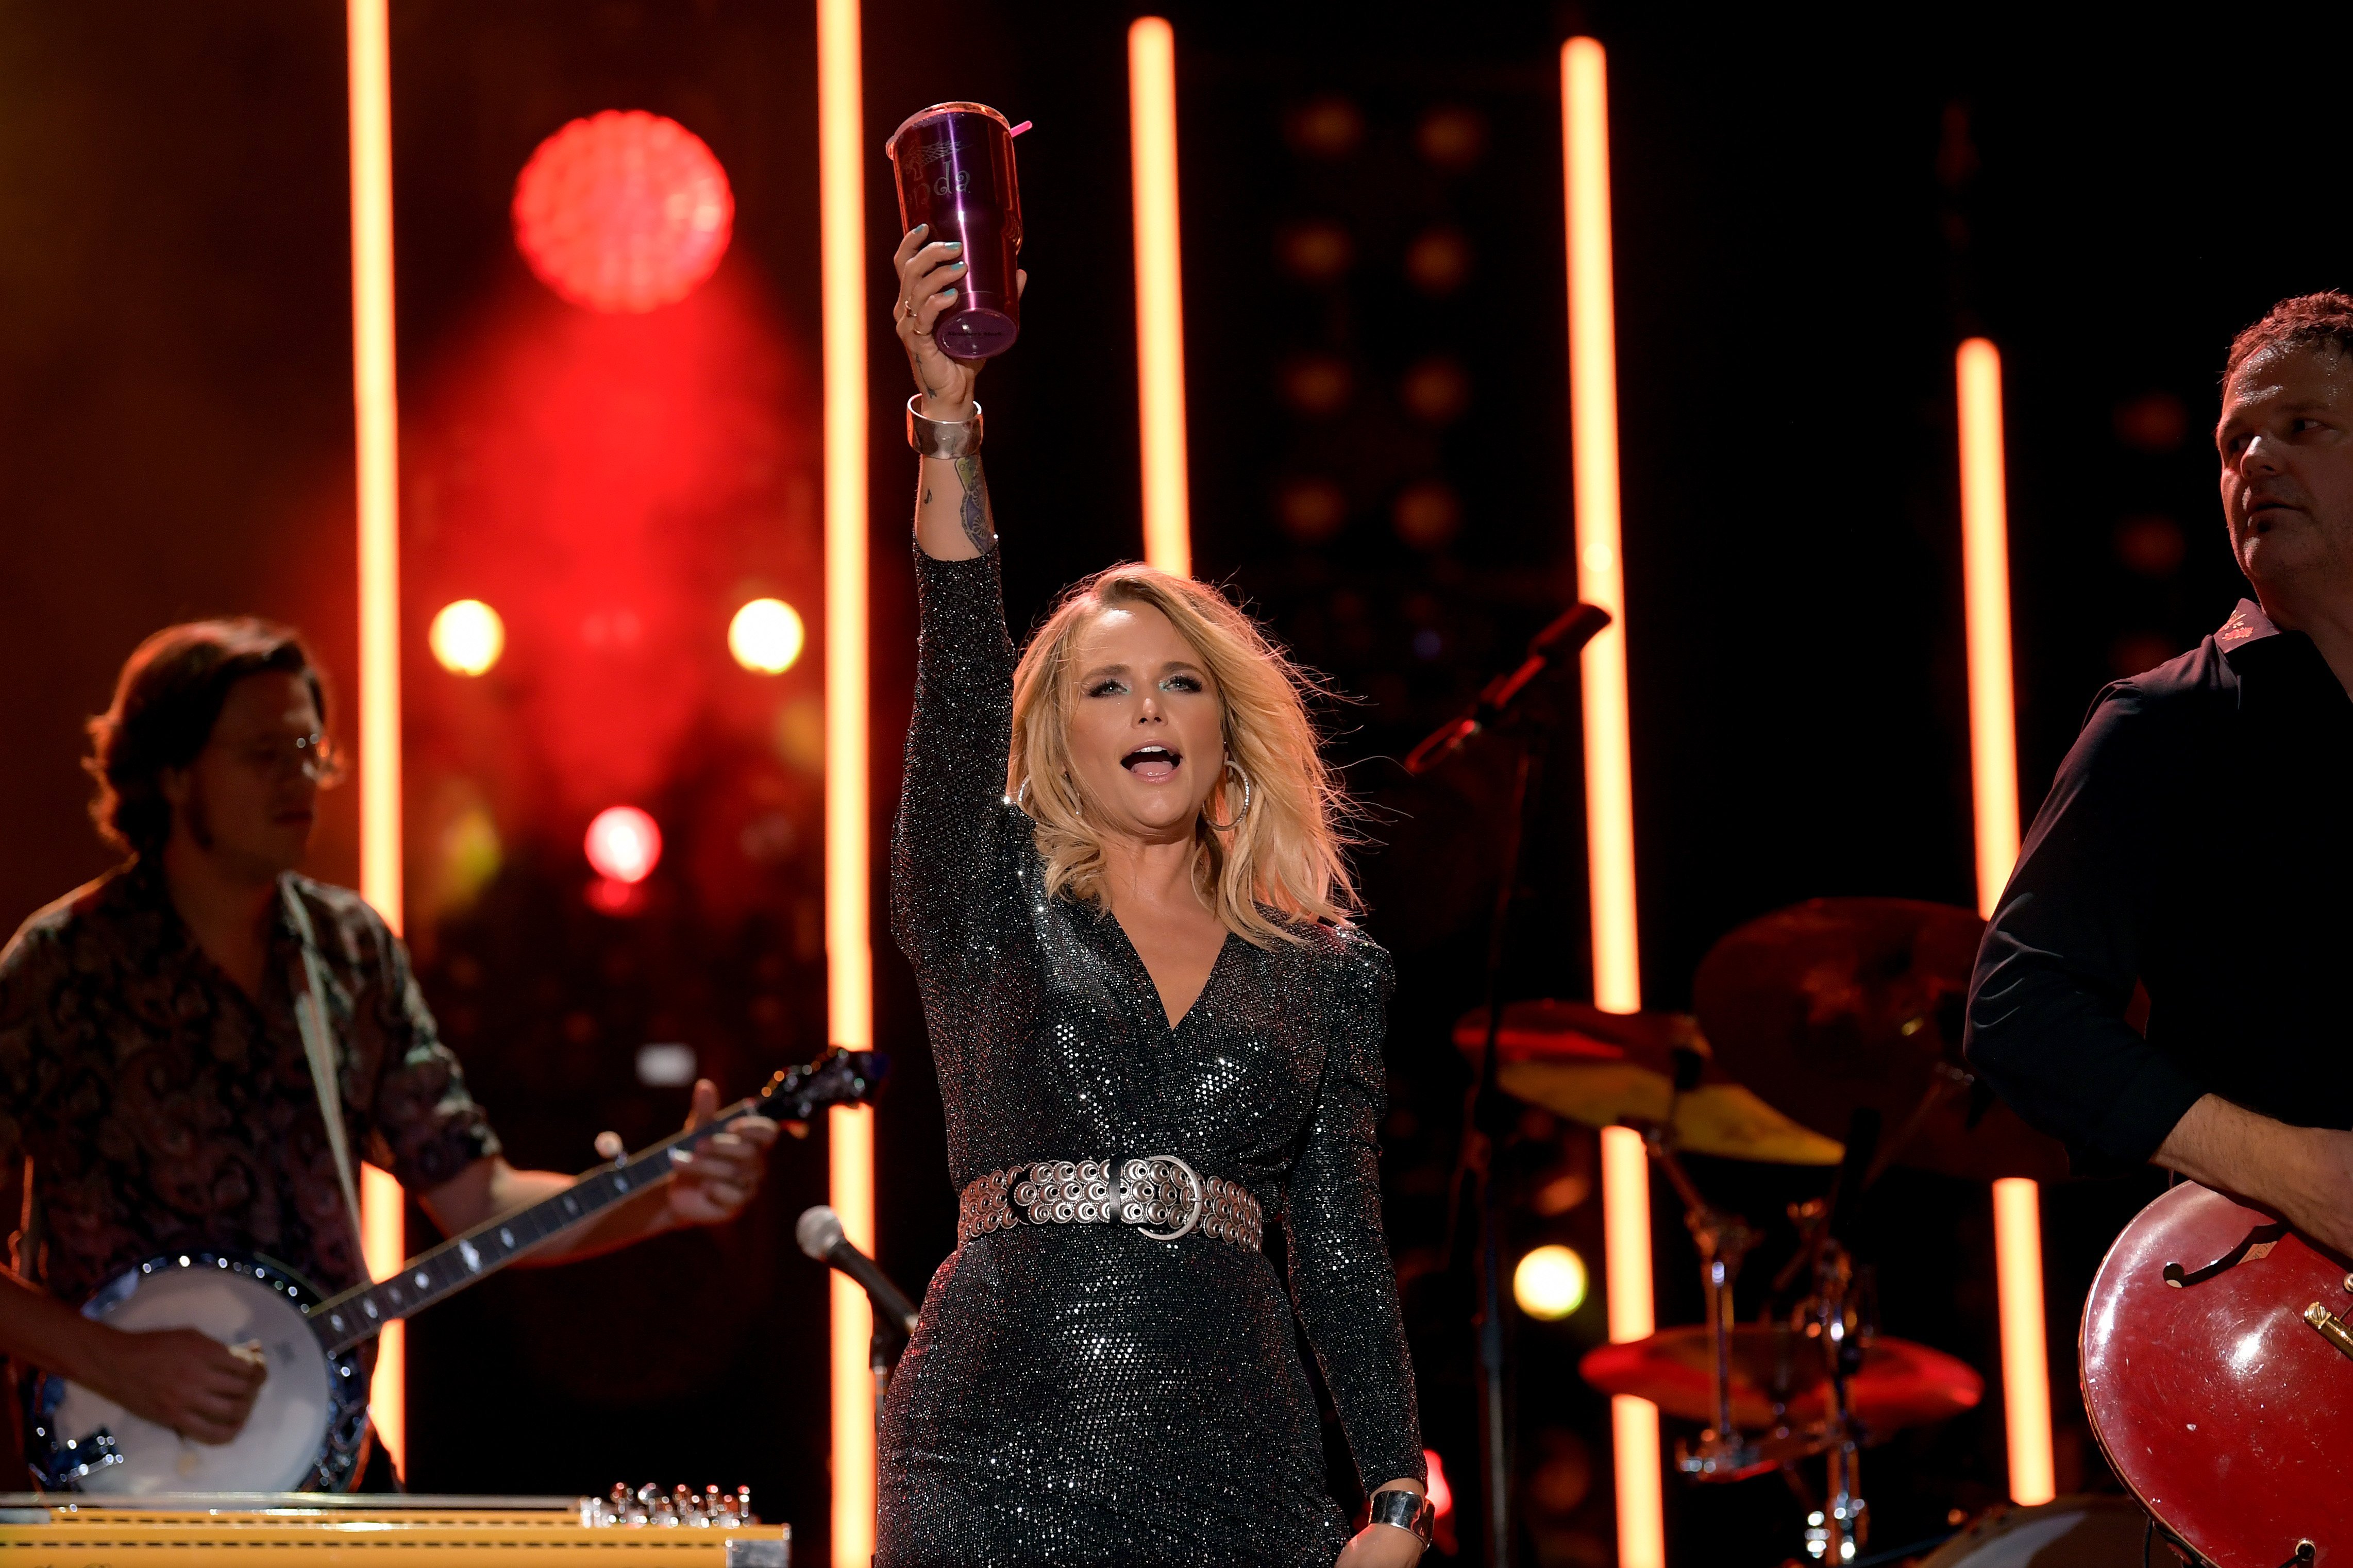 Miranda Lambert performs onstage during day 3 of the 2019 CMA Music Festival on June 8, 2019, in Nashville, Tennessee. | Source: Getty Images.